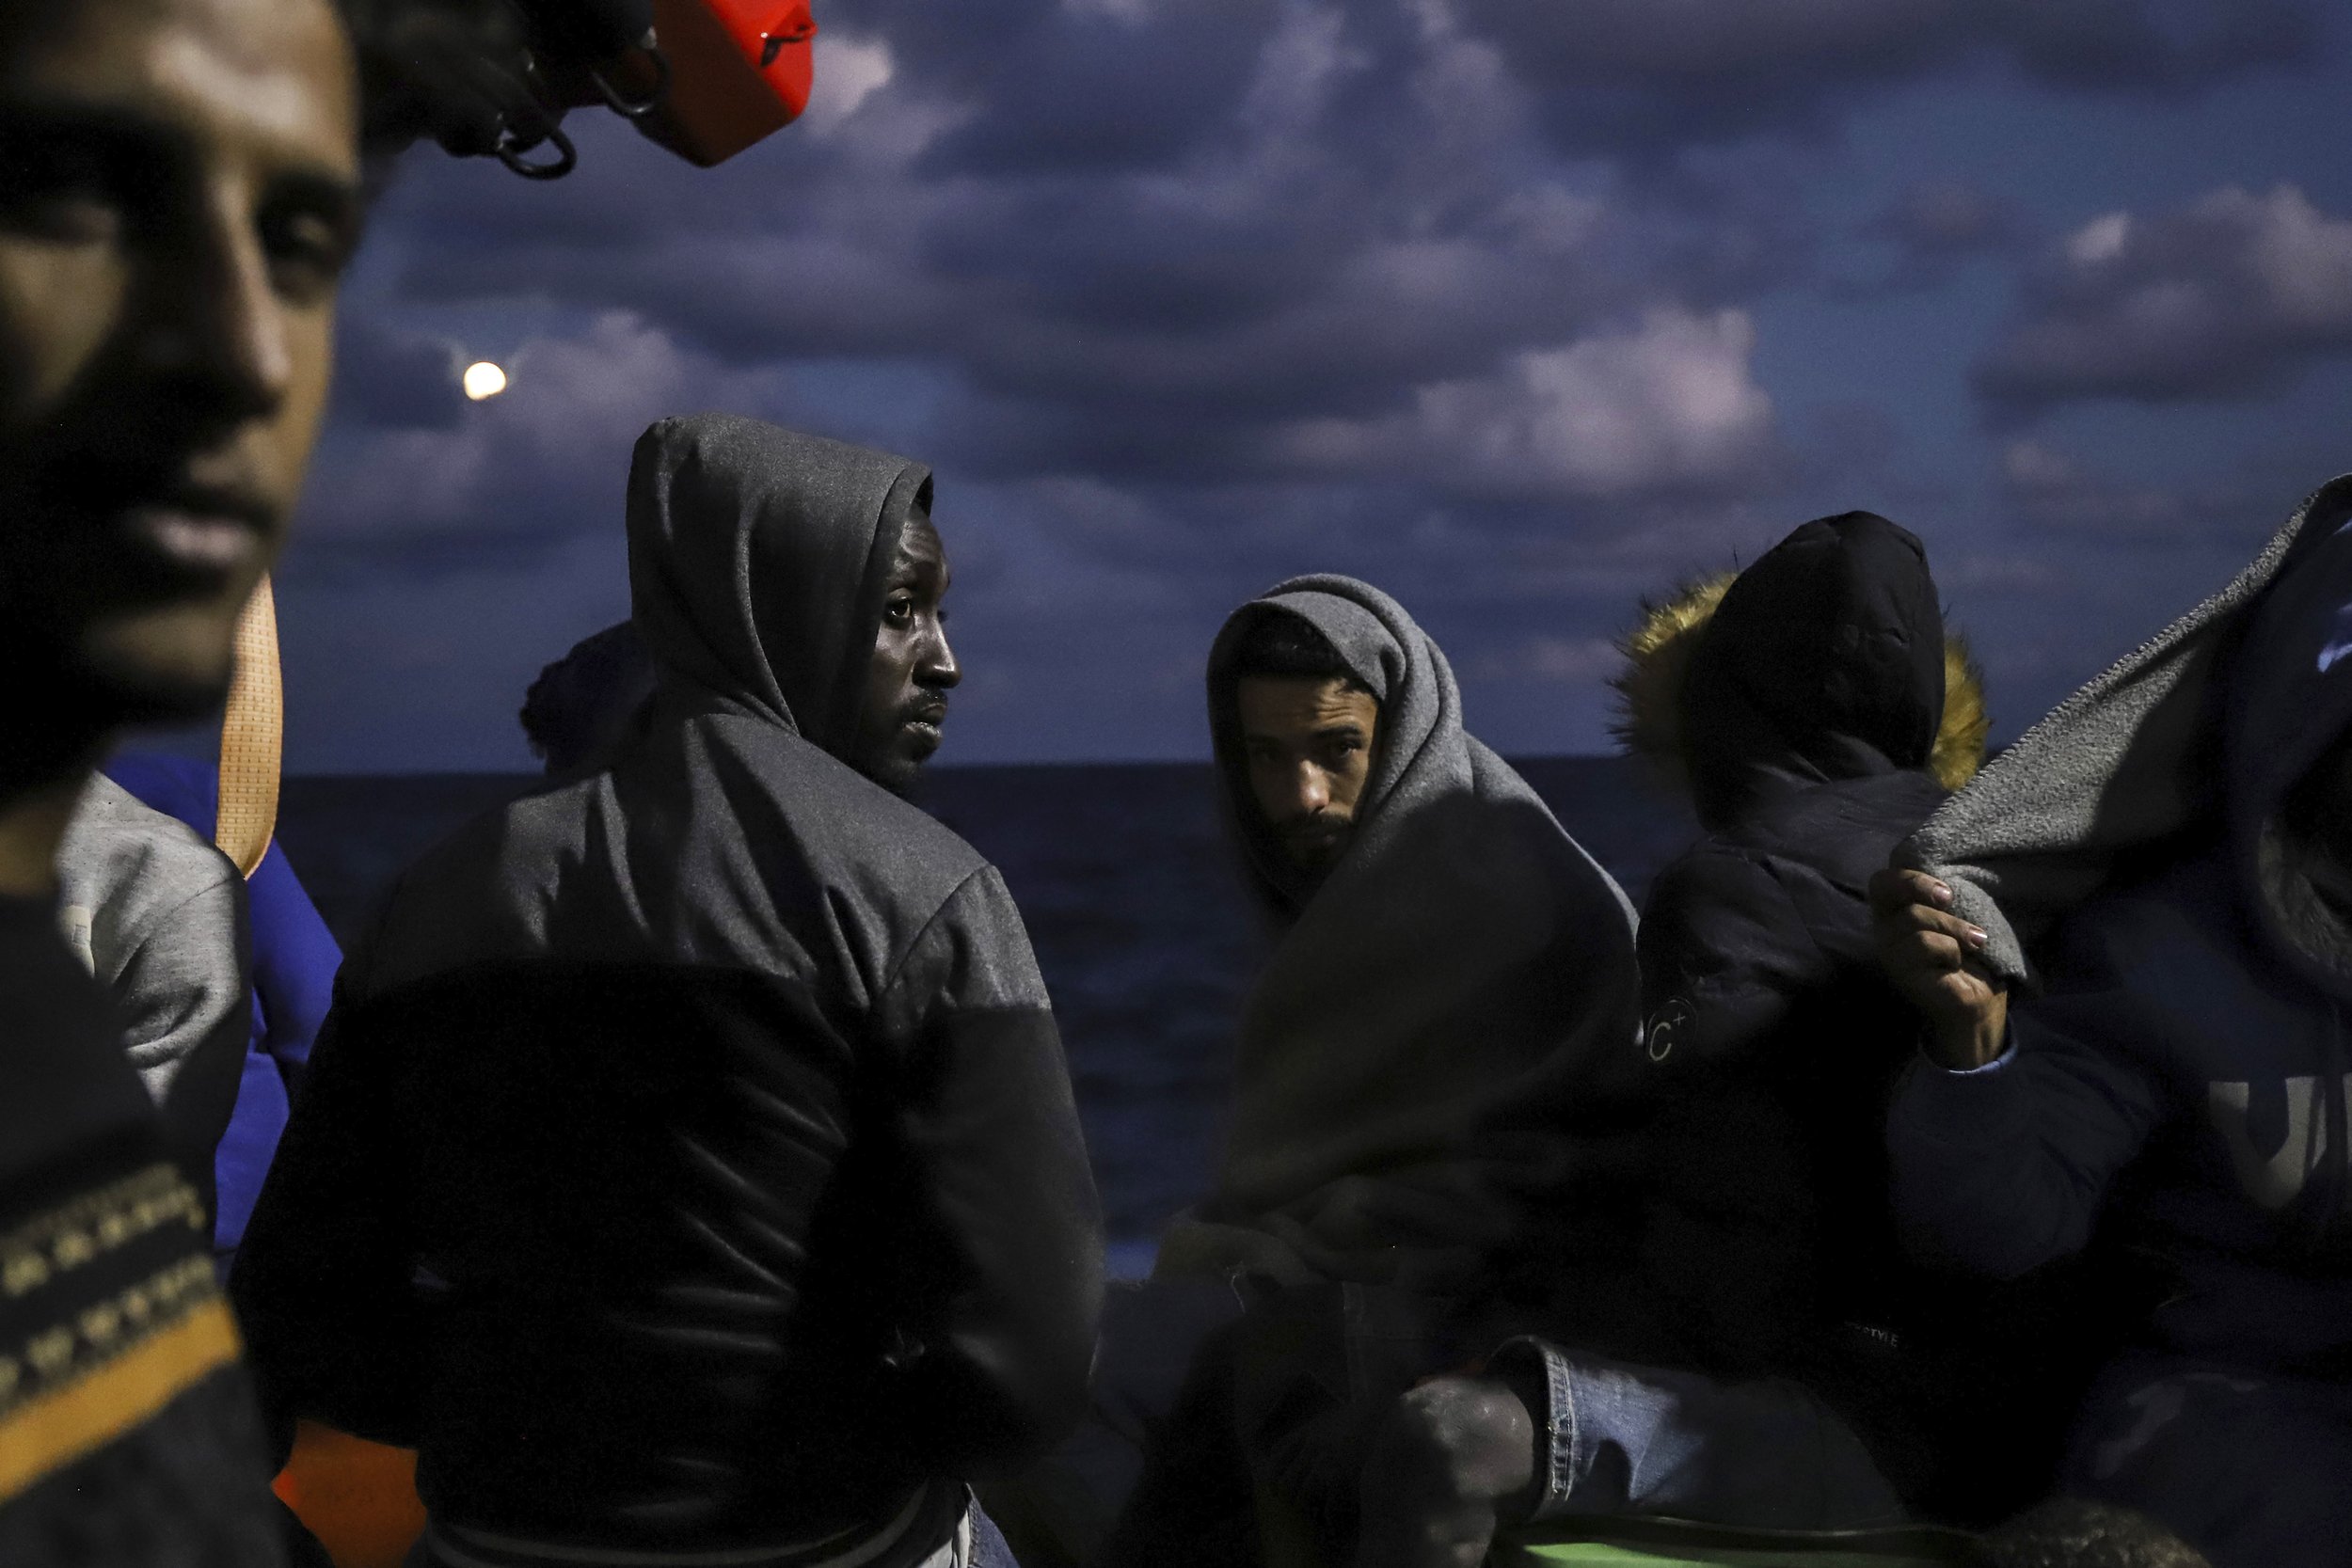  Migrants sit on the deck of the Sea Watch-3 rescue ship in the Maltese search and rescue zone on Oct. 19, 2021. In the prior two days, the ship had rescued 412 migrants from seven different boats in distress and was asking for a safe port to disemba